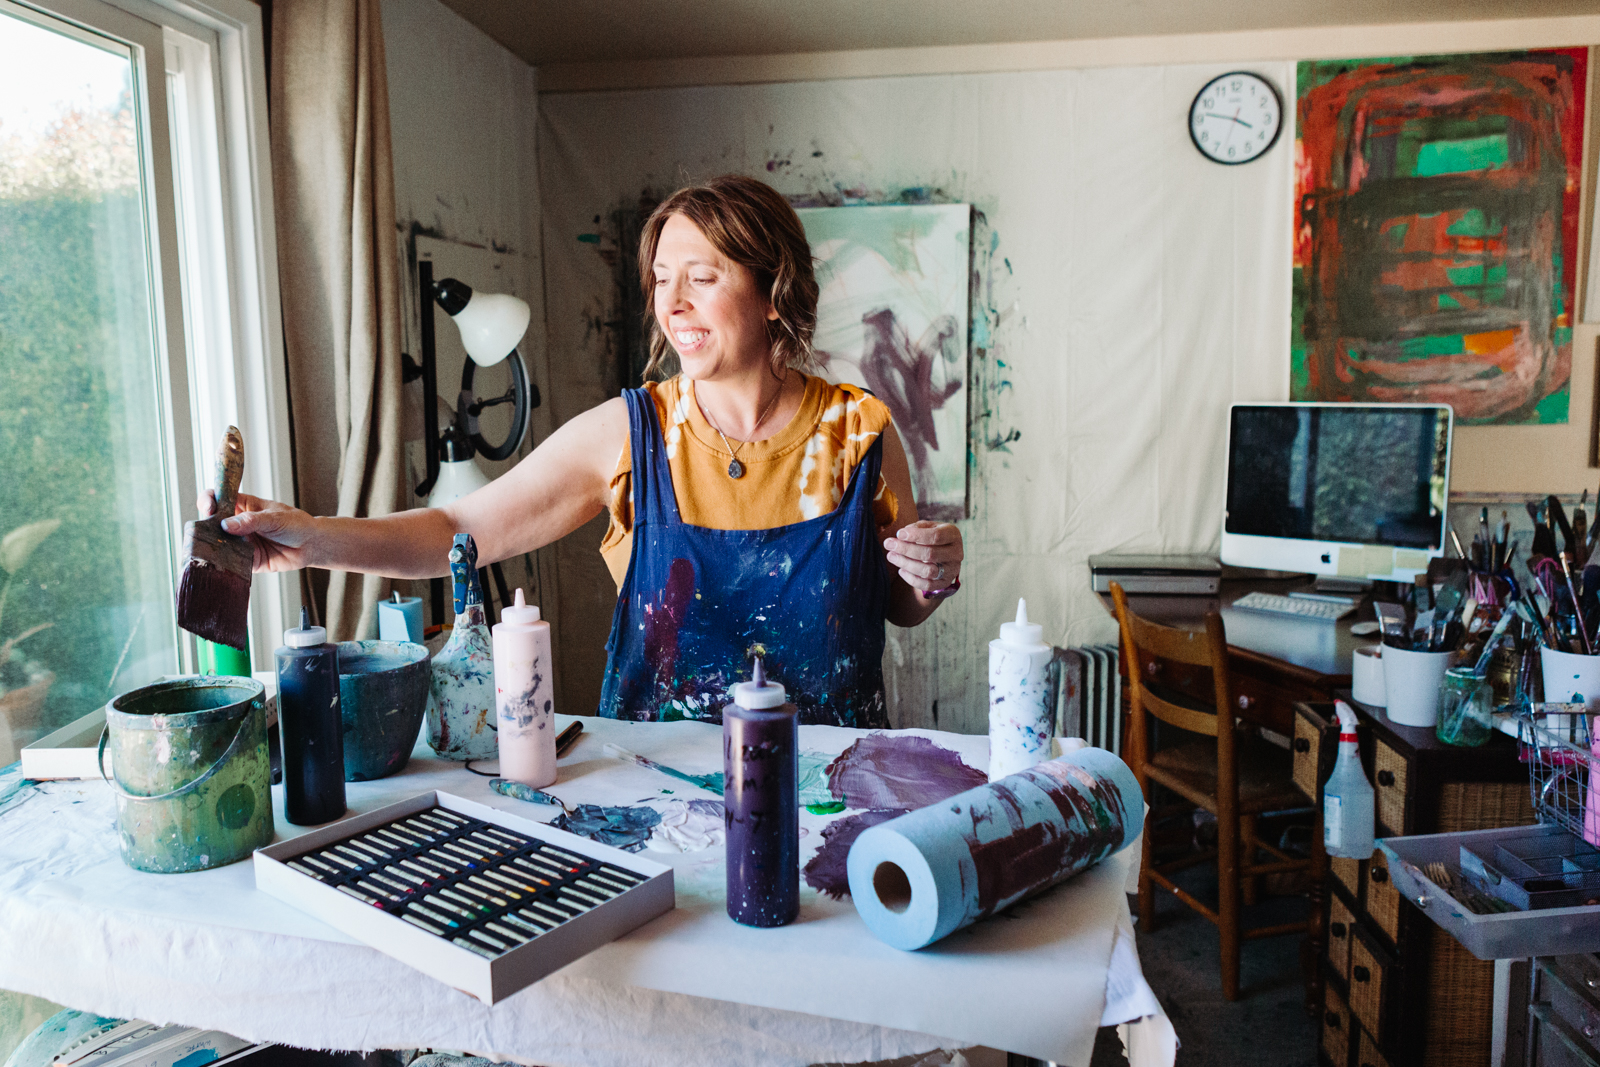 A lifestyle portrait photography session of a Santa Barbara artist Wendy Fisher in her creative studio. Images feature environmental portraiture and headshots focused on her paintings and creative work in progress.